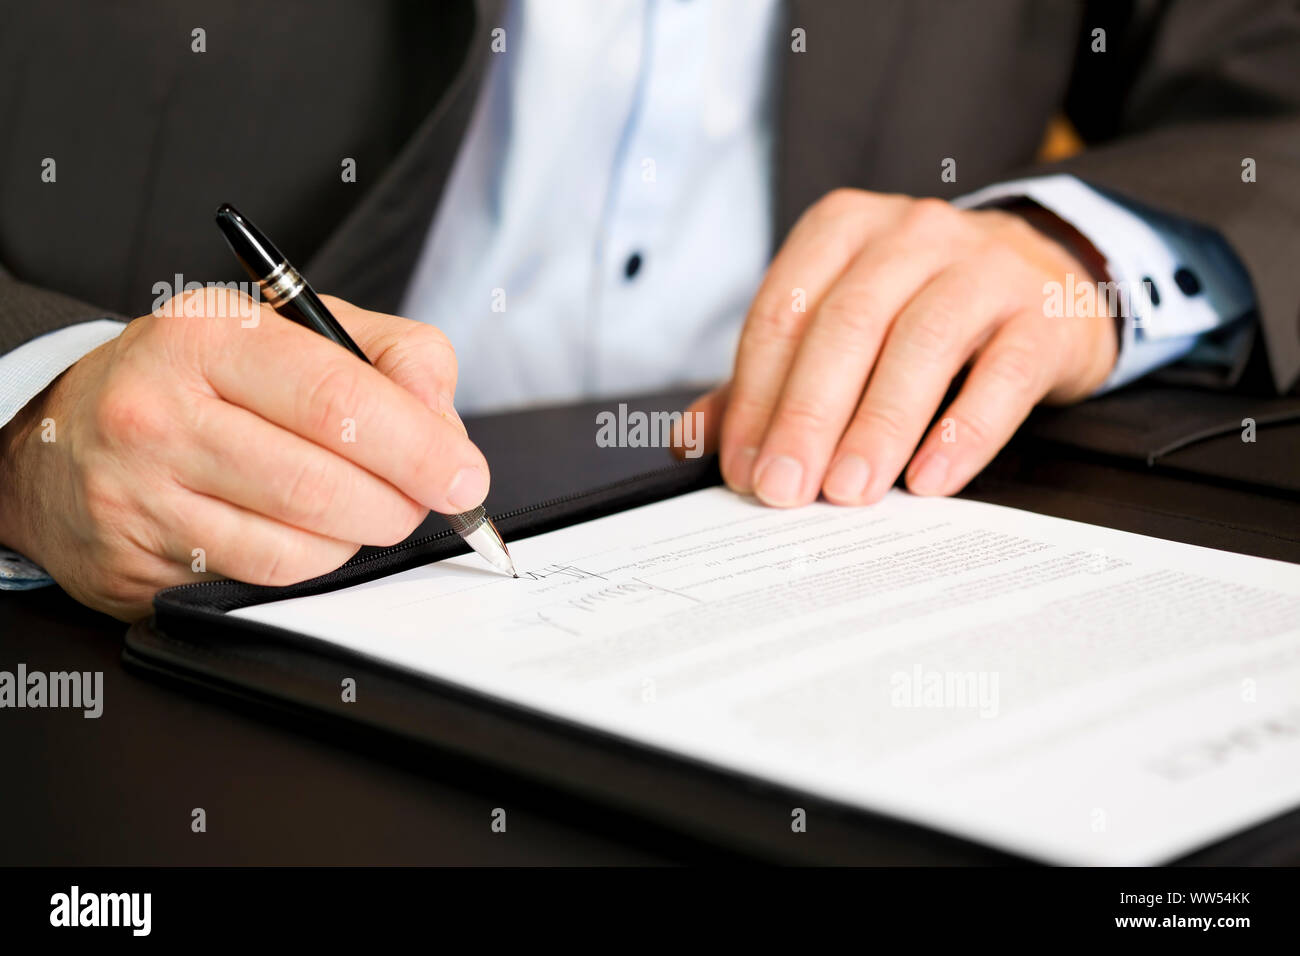 Business person signing a contract, focus on signature. Stock Photo